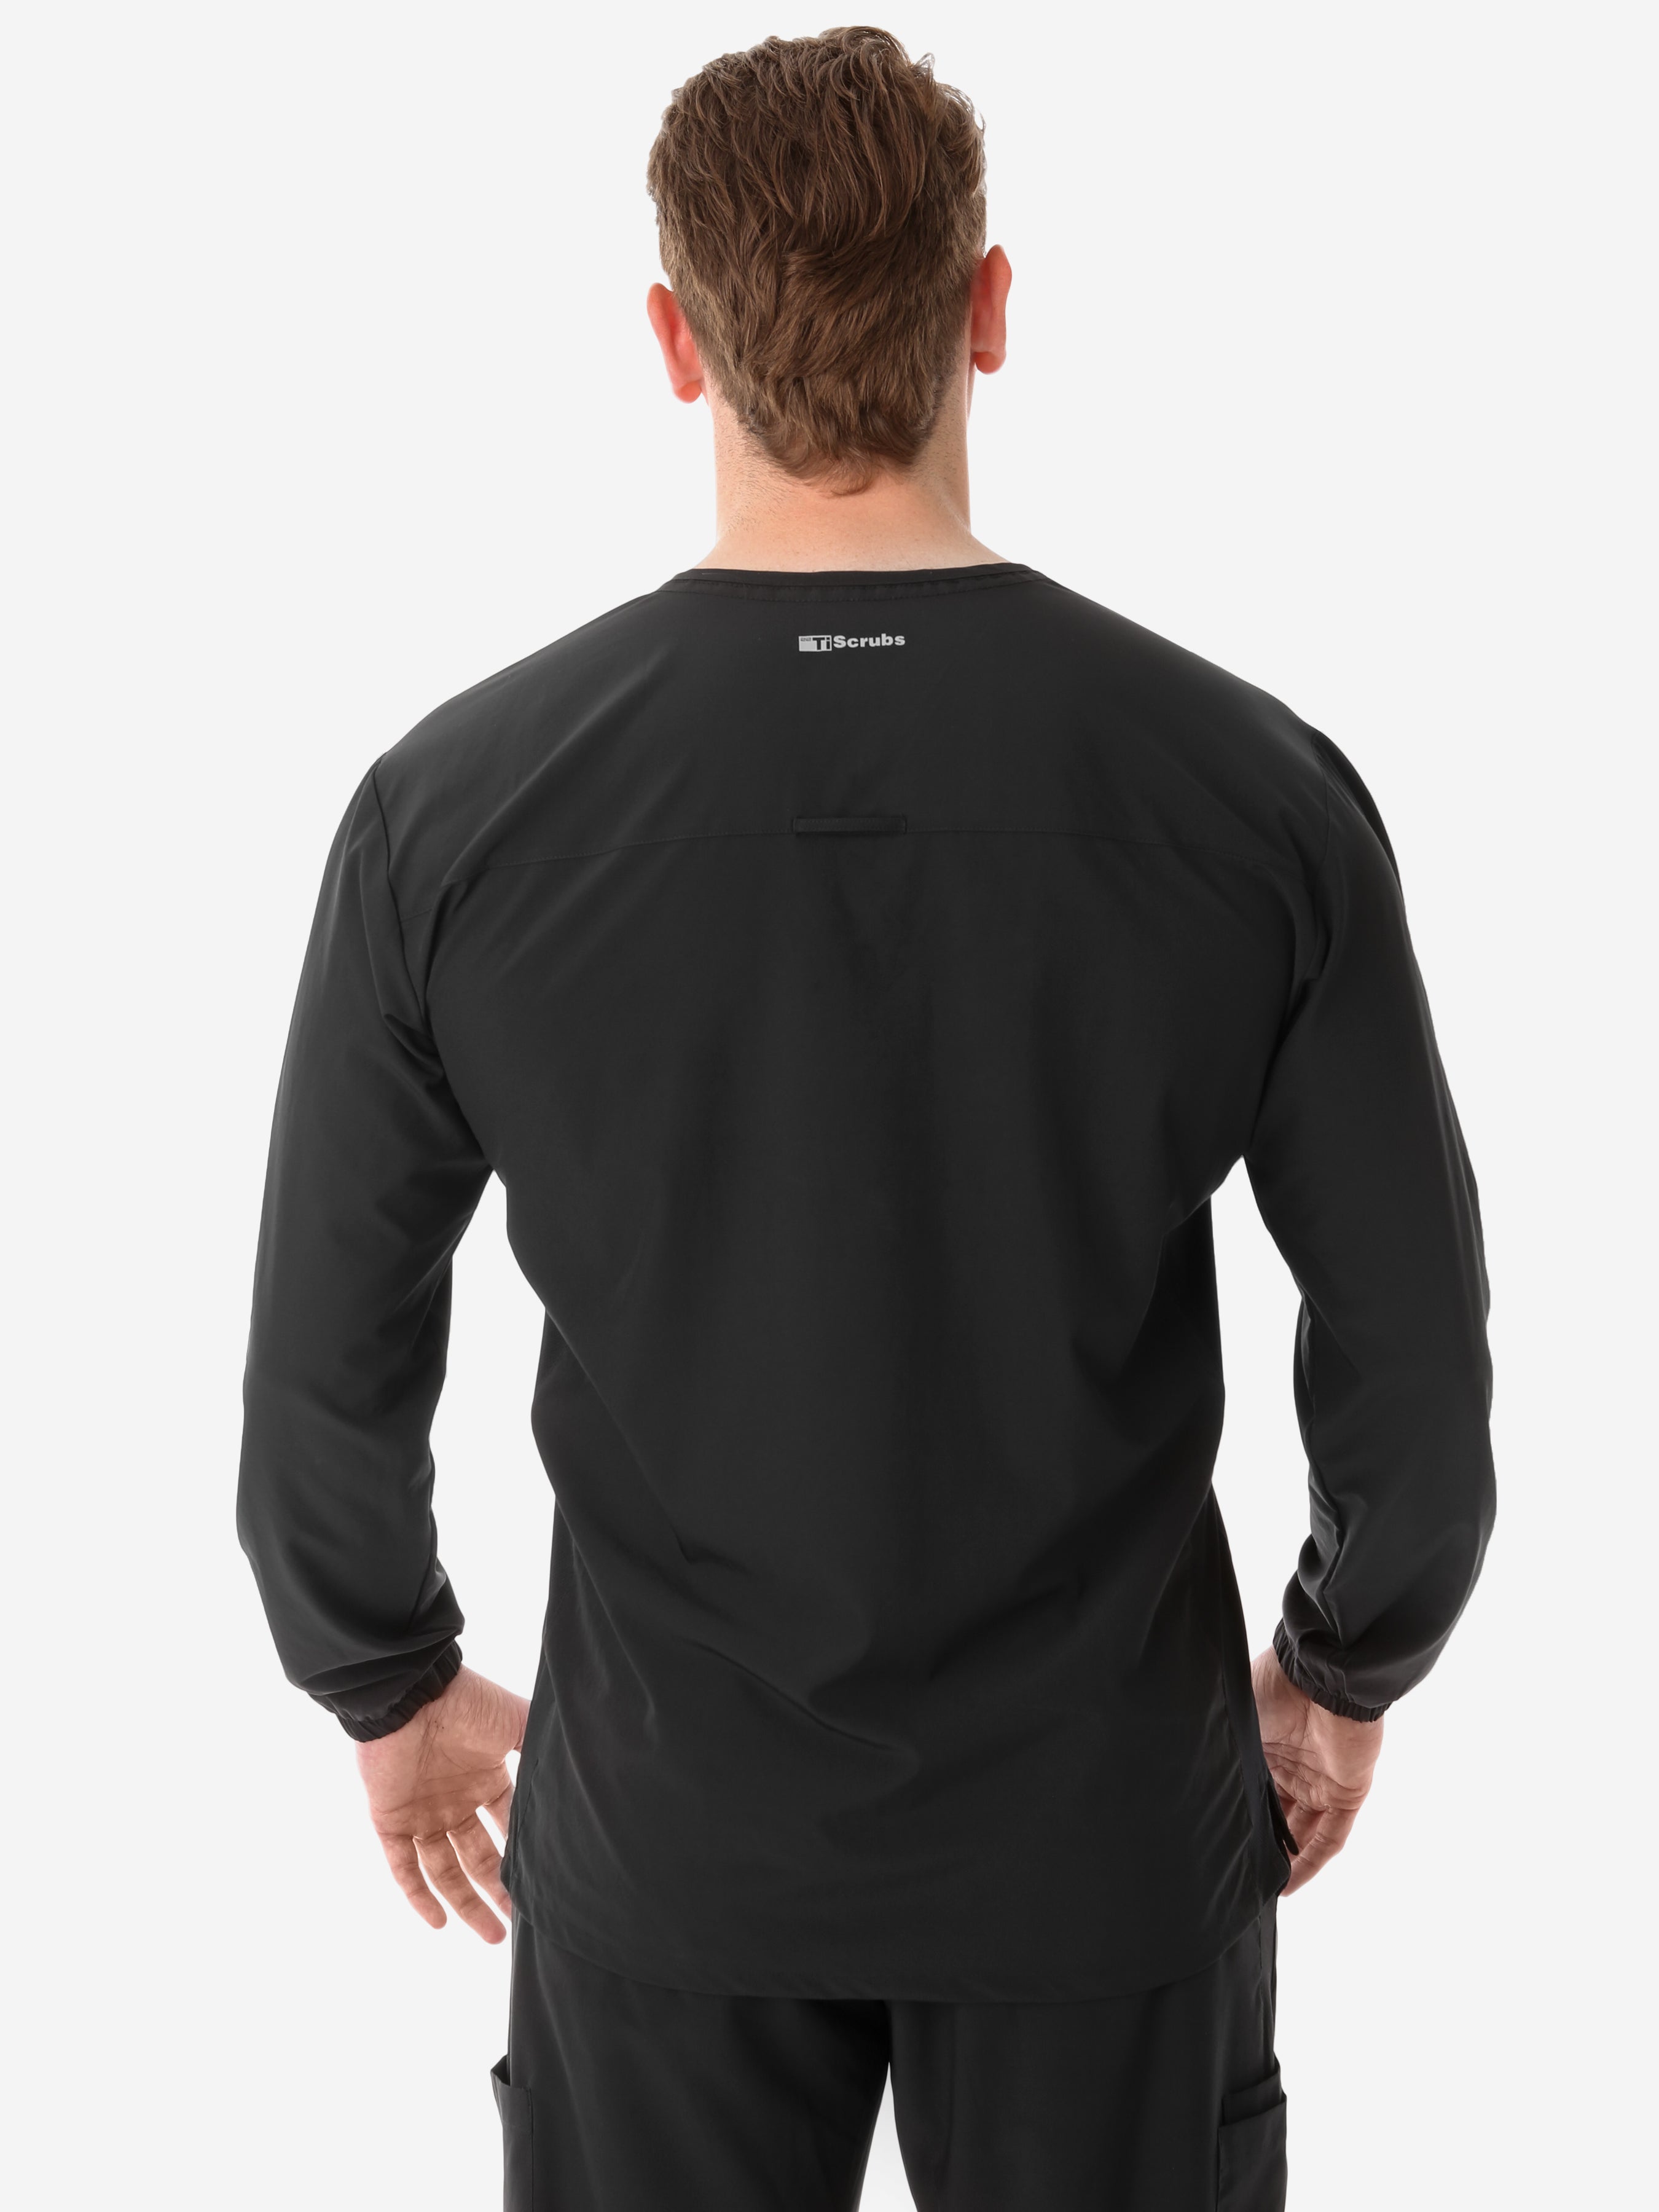 Men's Long Sleeve Scrub Top with Two Chest Pockets Real Black Top Only Back View